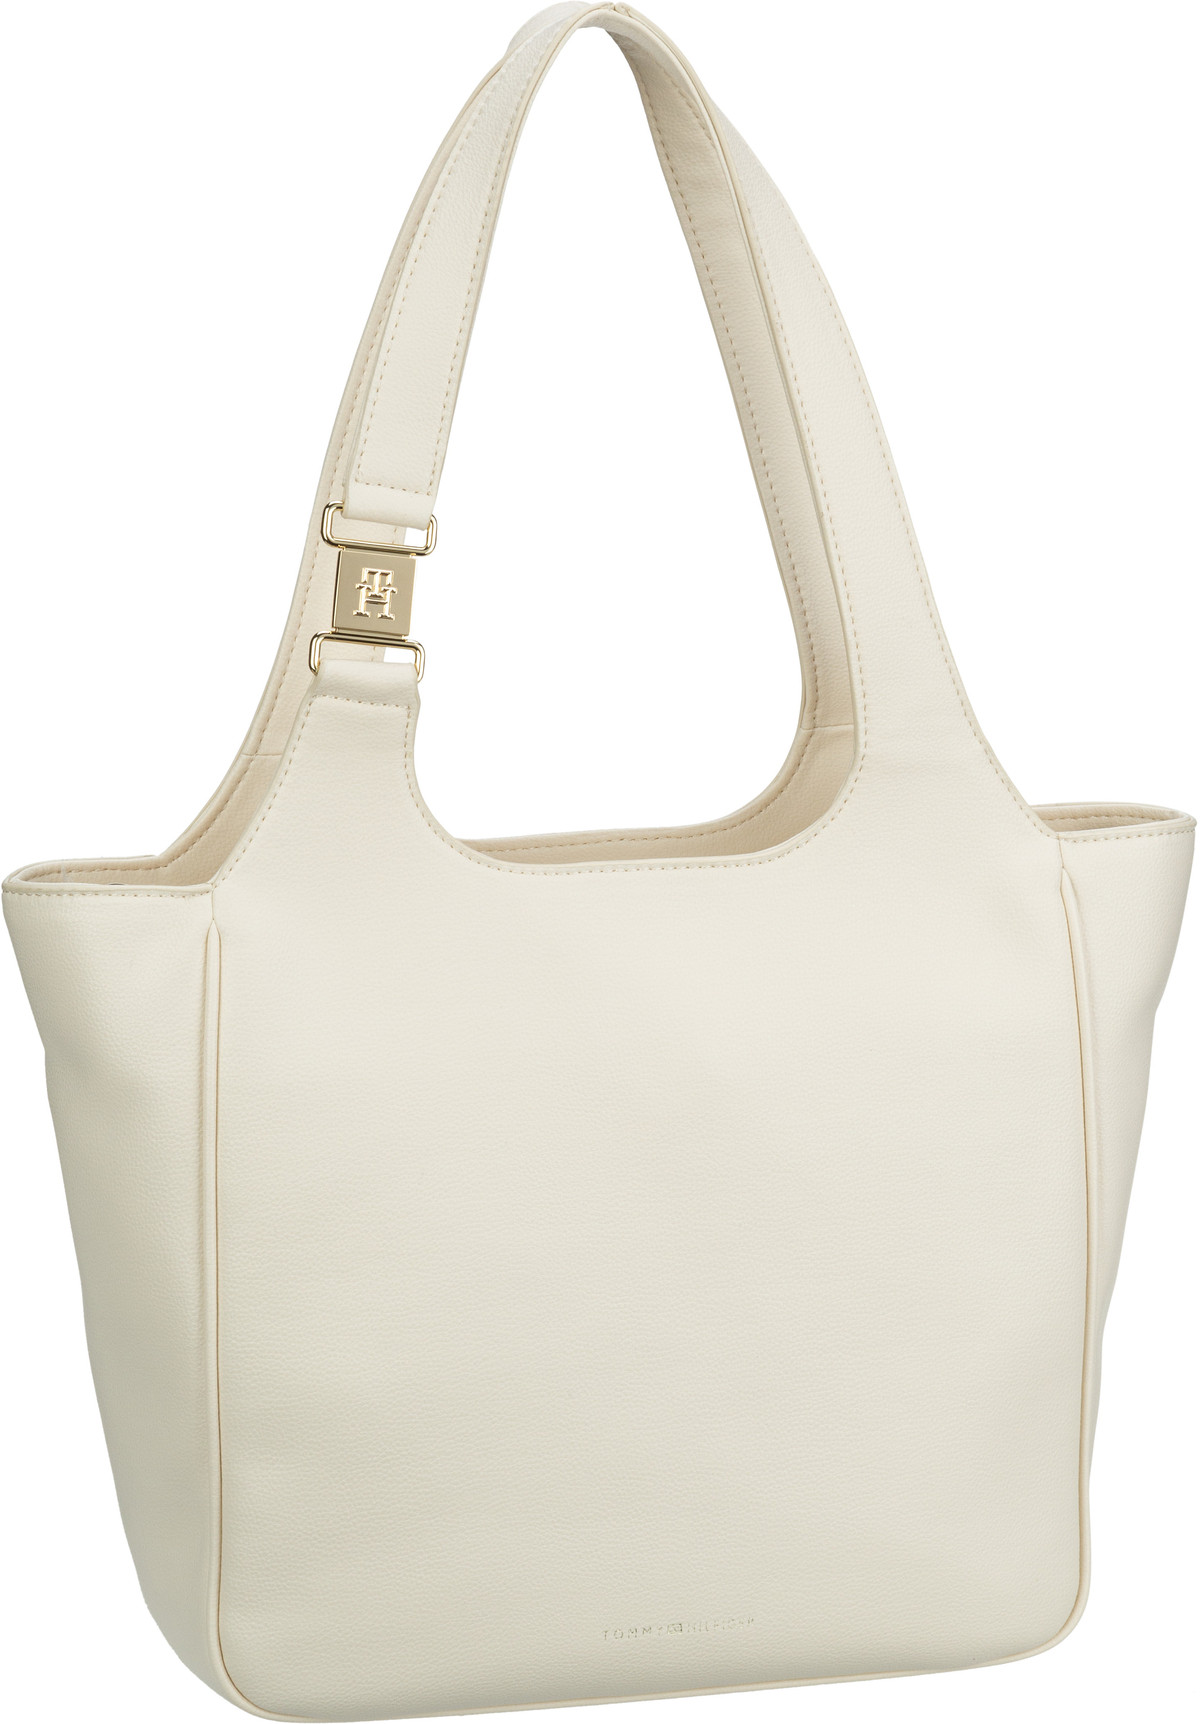 tommy hilfiger -  Shopper TH Contemporary Tote PF23 Beige (13.4 Liter)